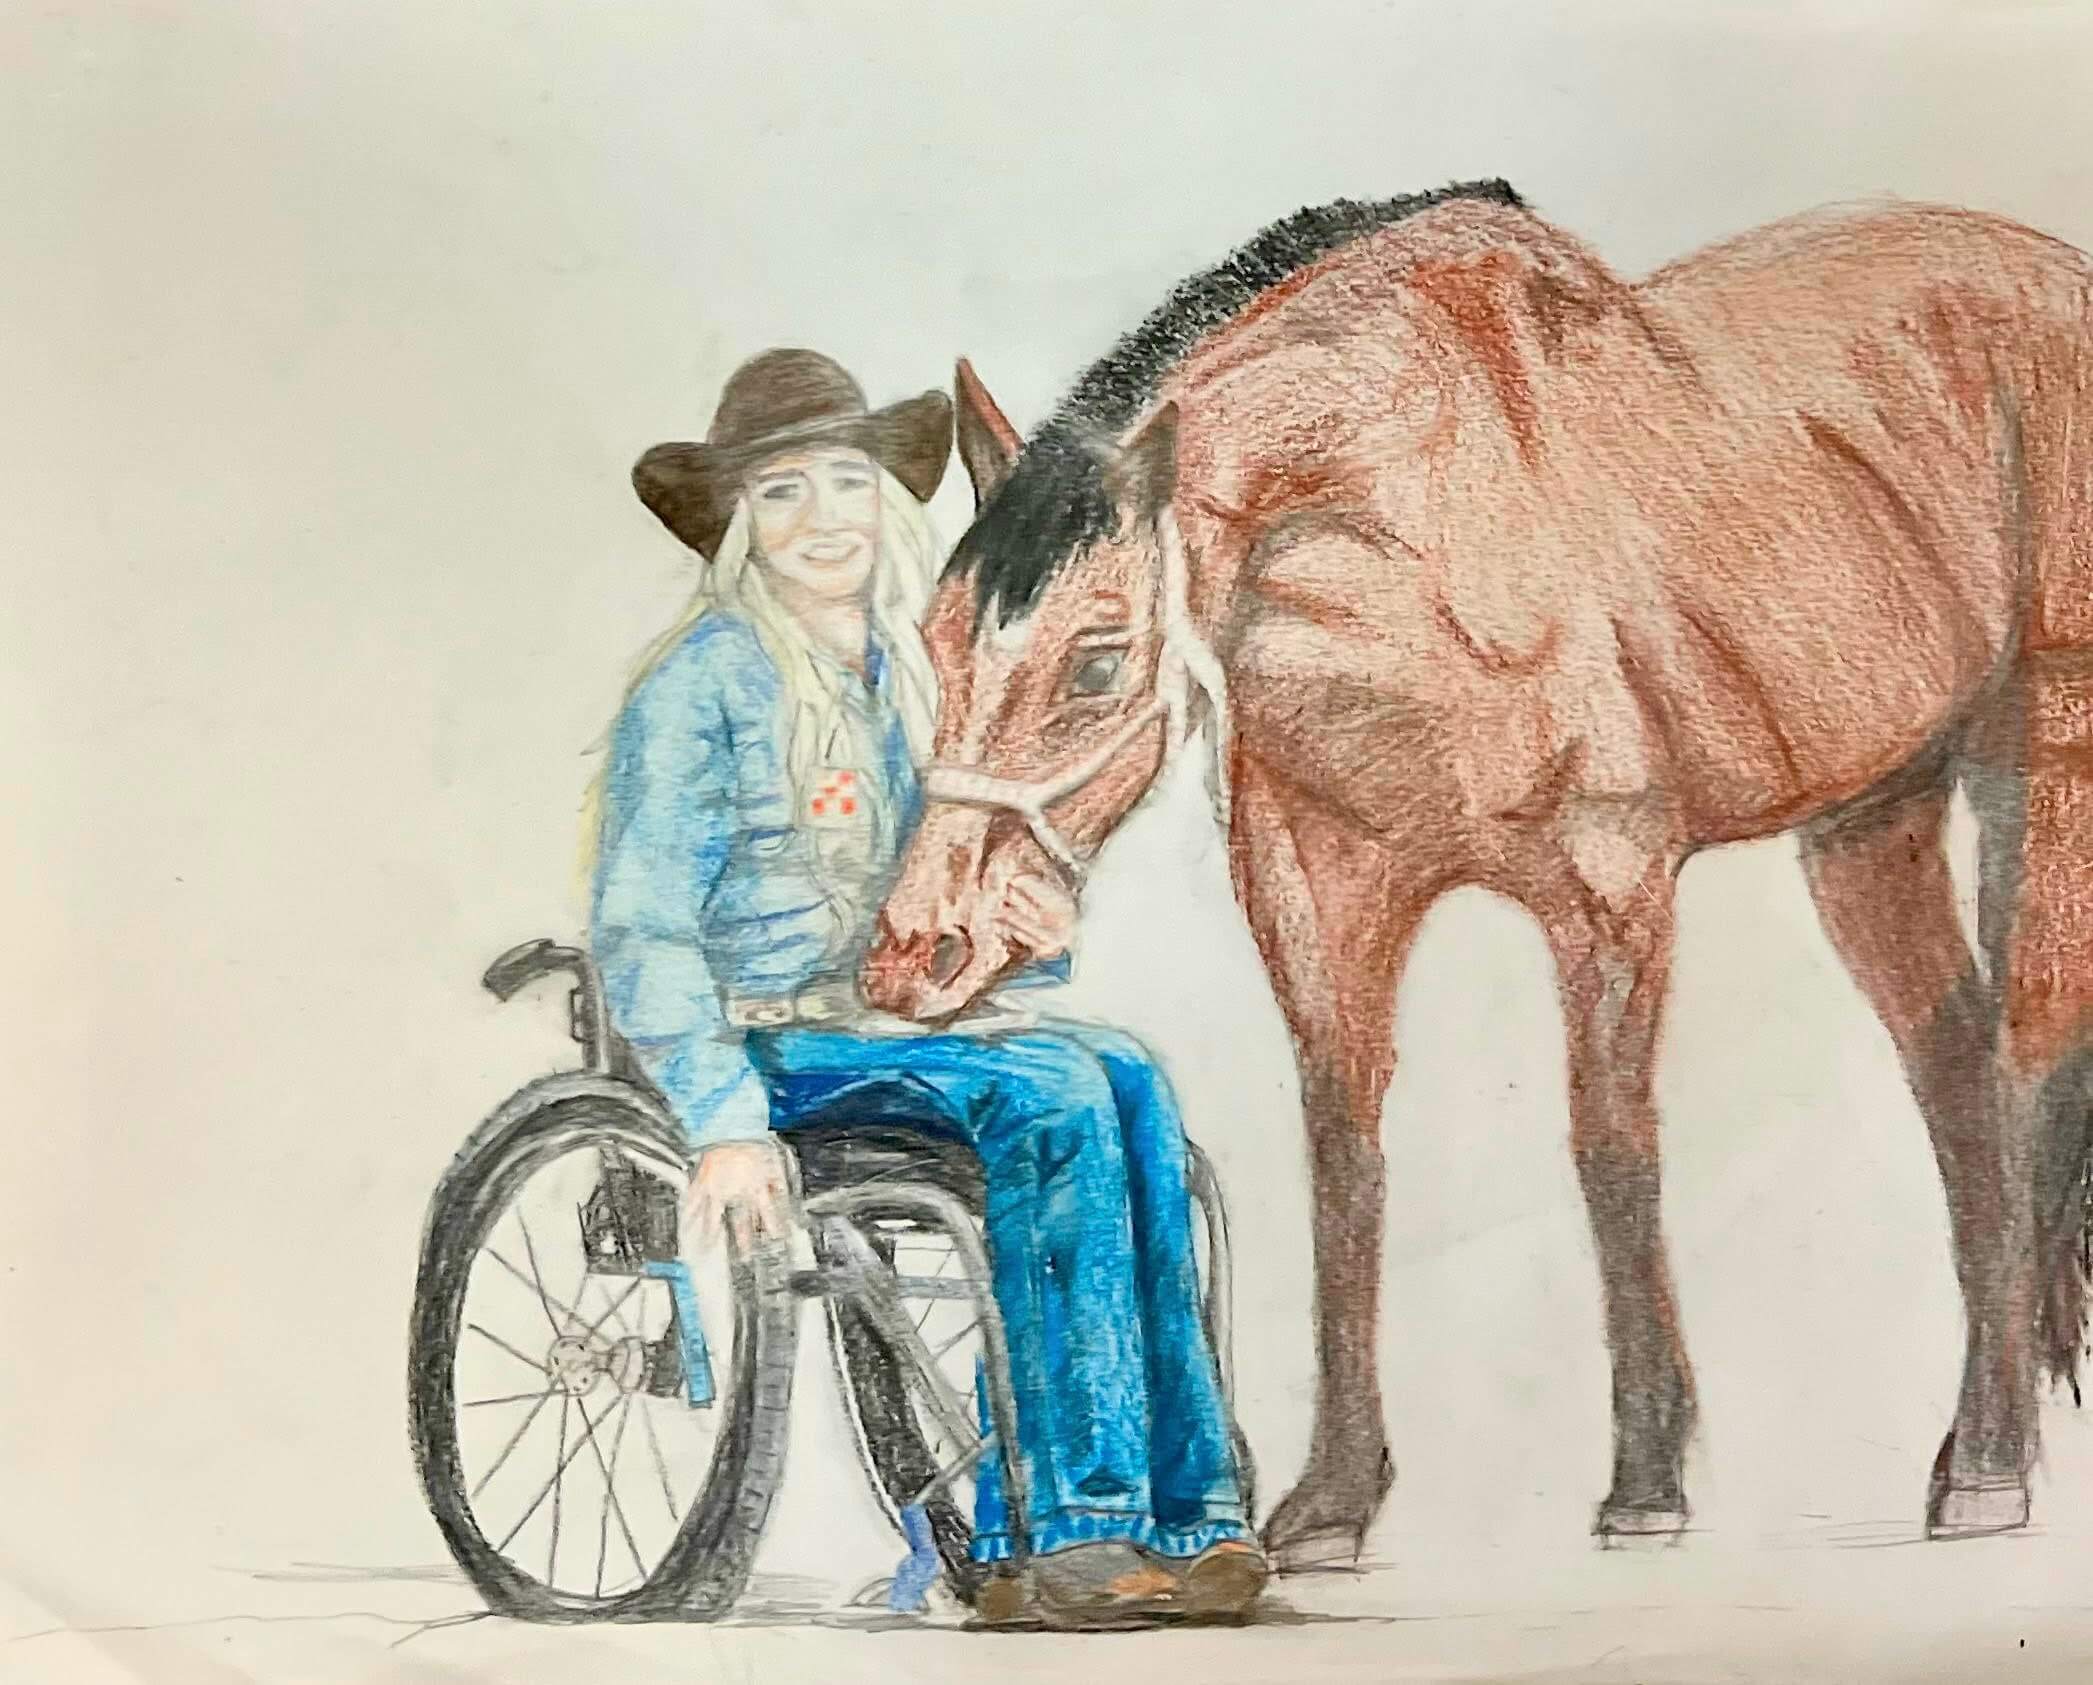 Mikayla Hawks of Amberly Snyder